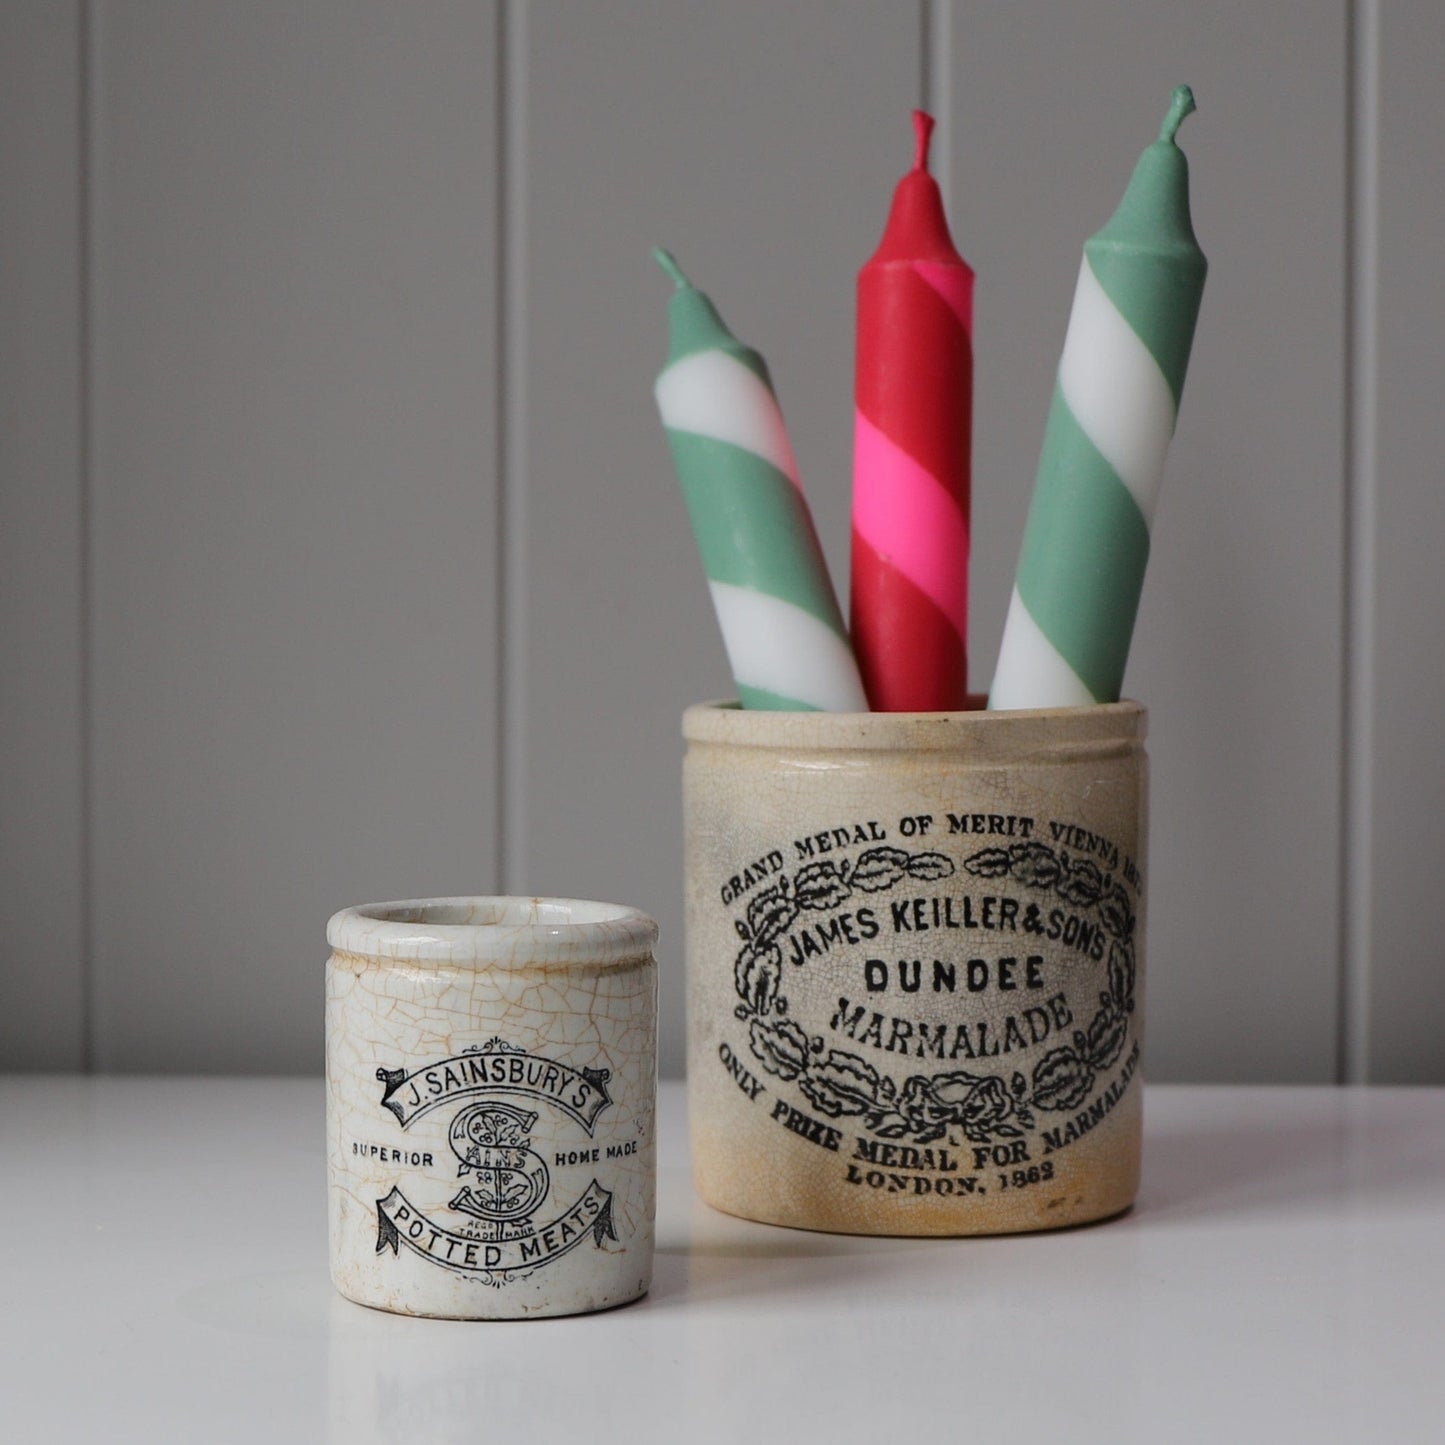 Twirly Twirly & Marble Design Dinner Candles